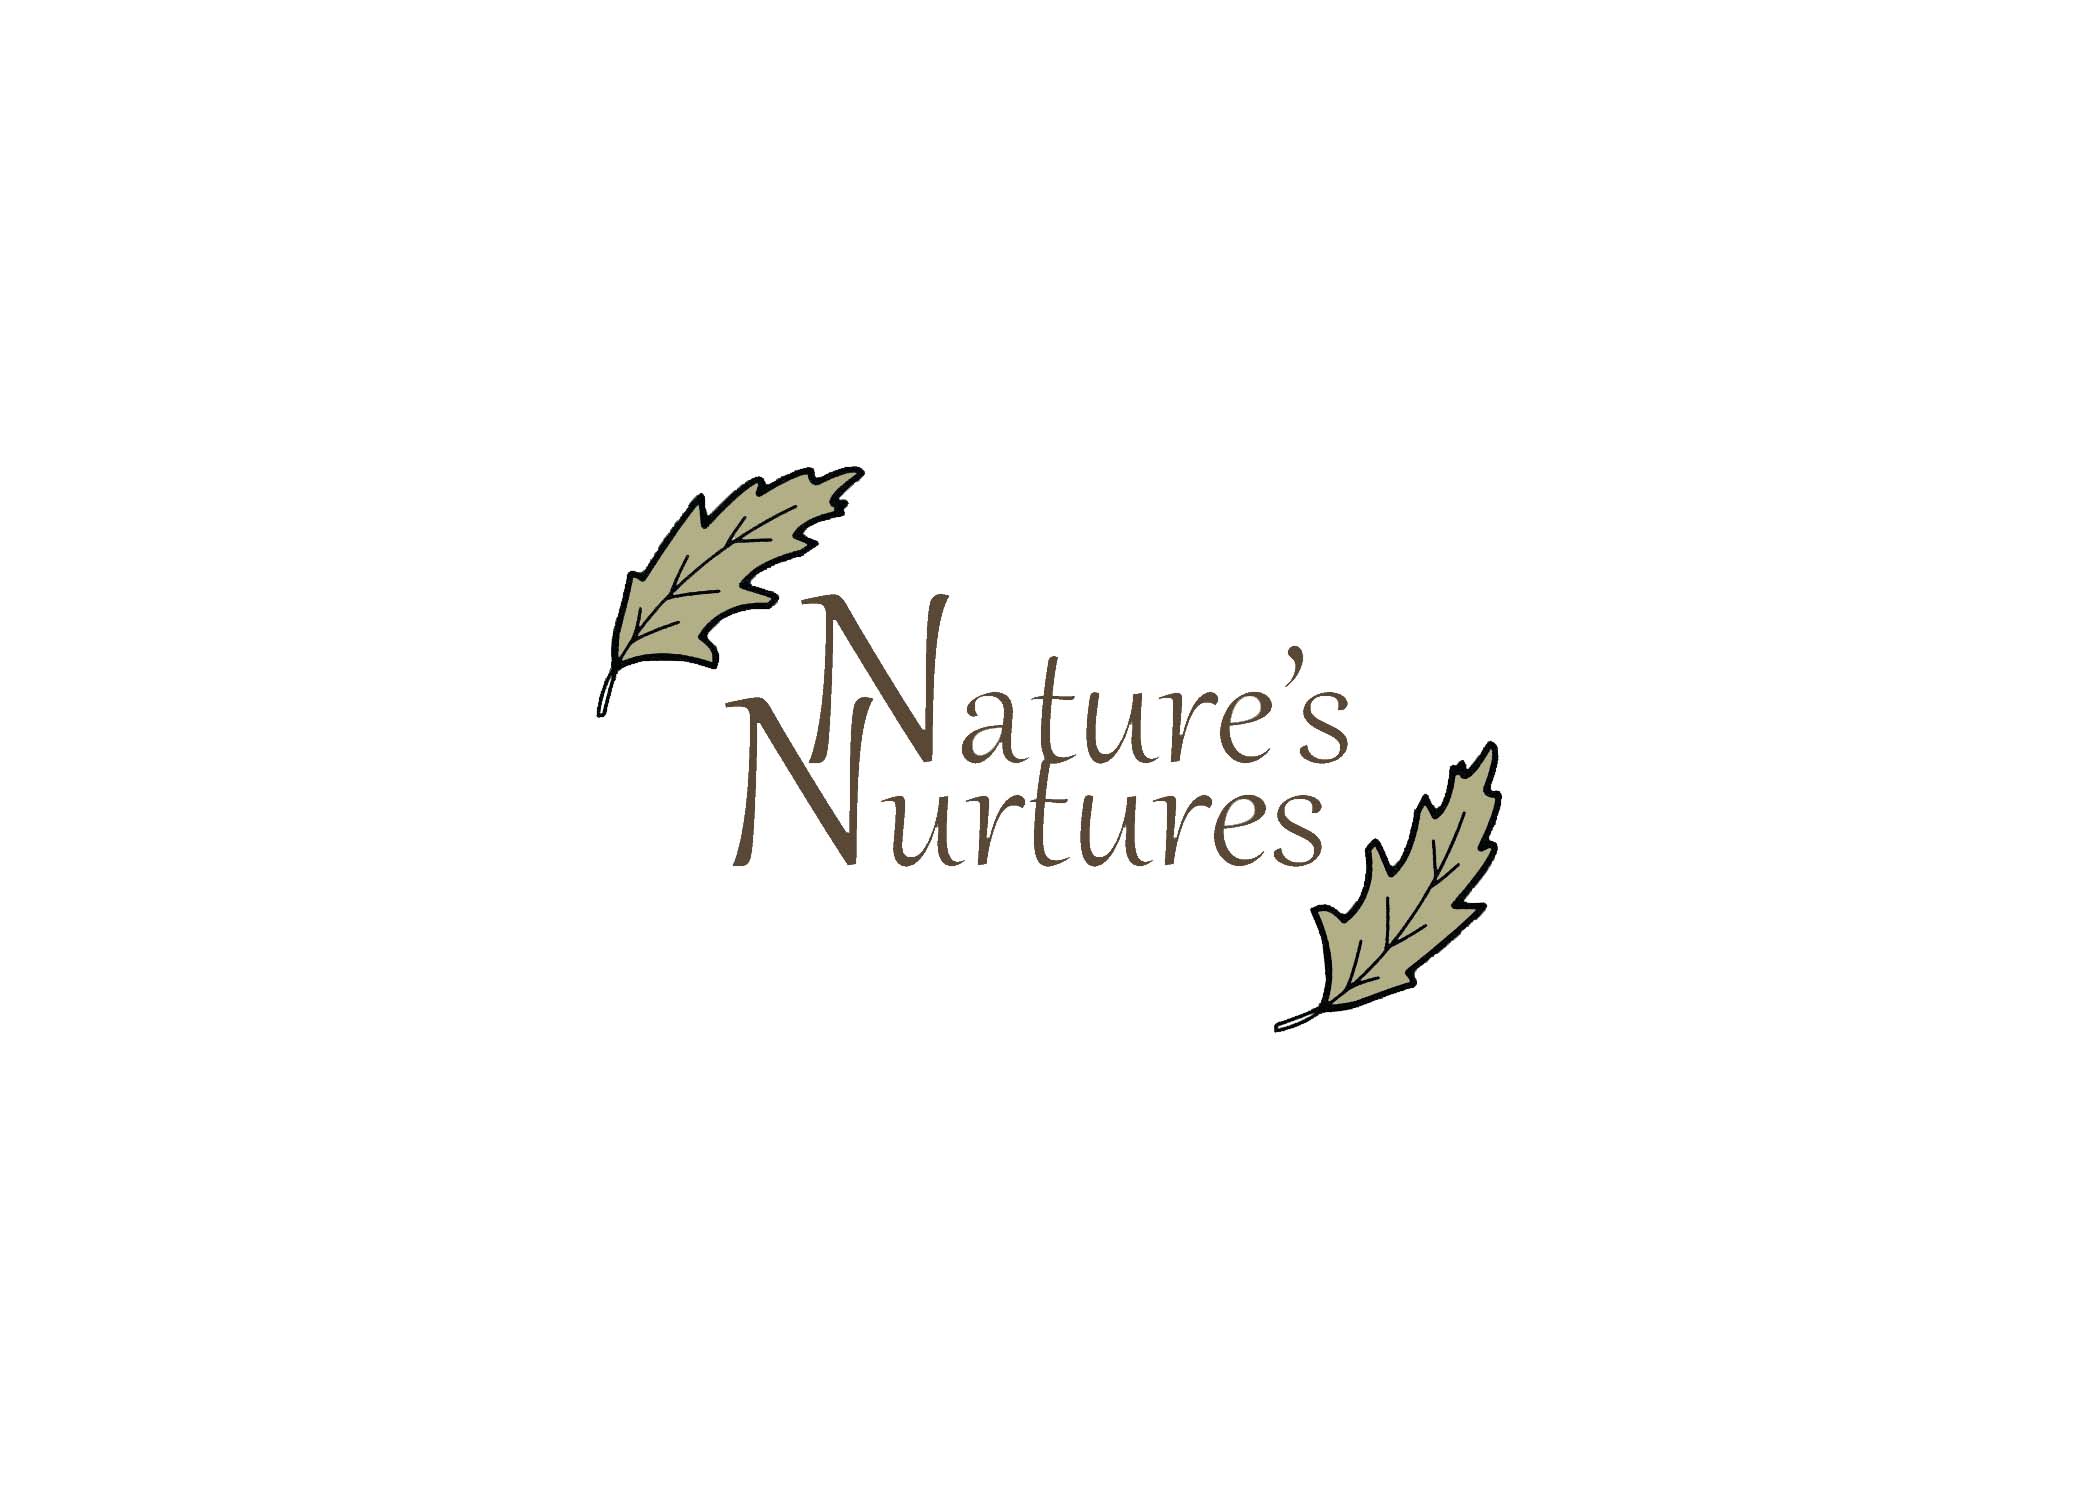 NATURE’S NURTURES offers the best natural and organic products for your healthy body